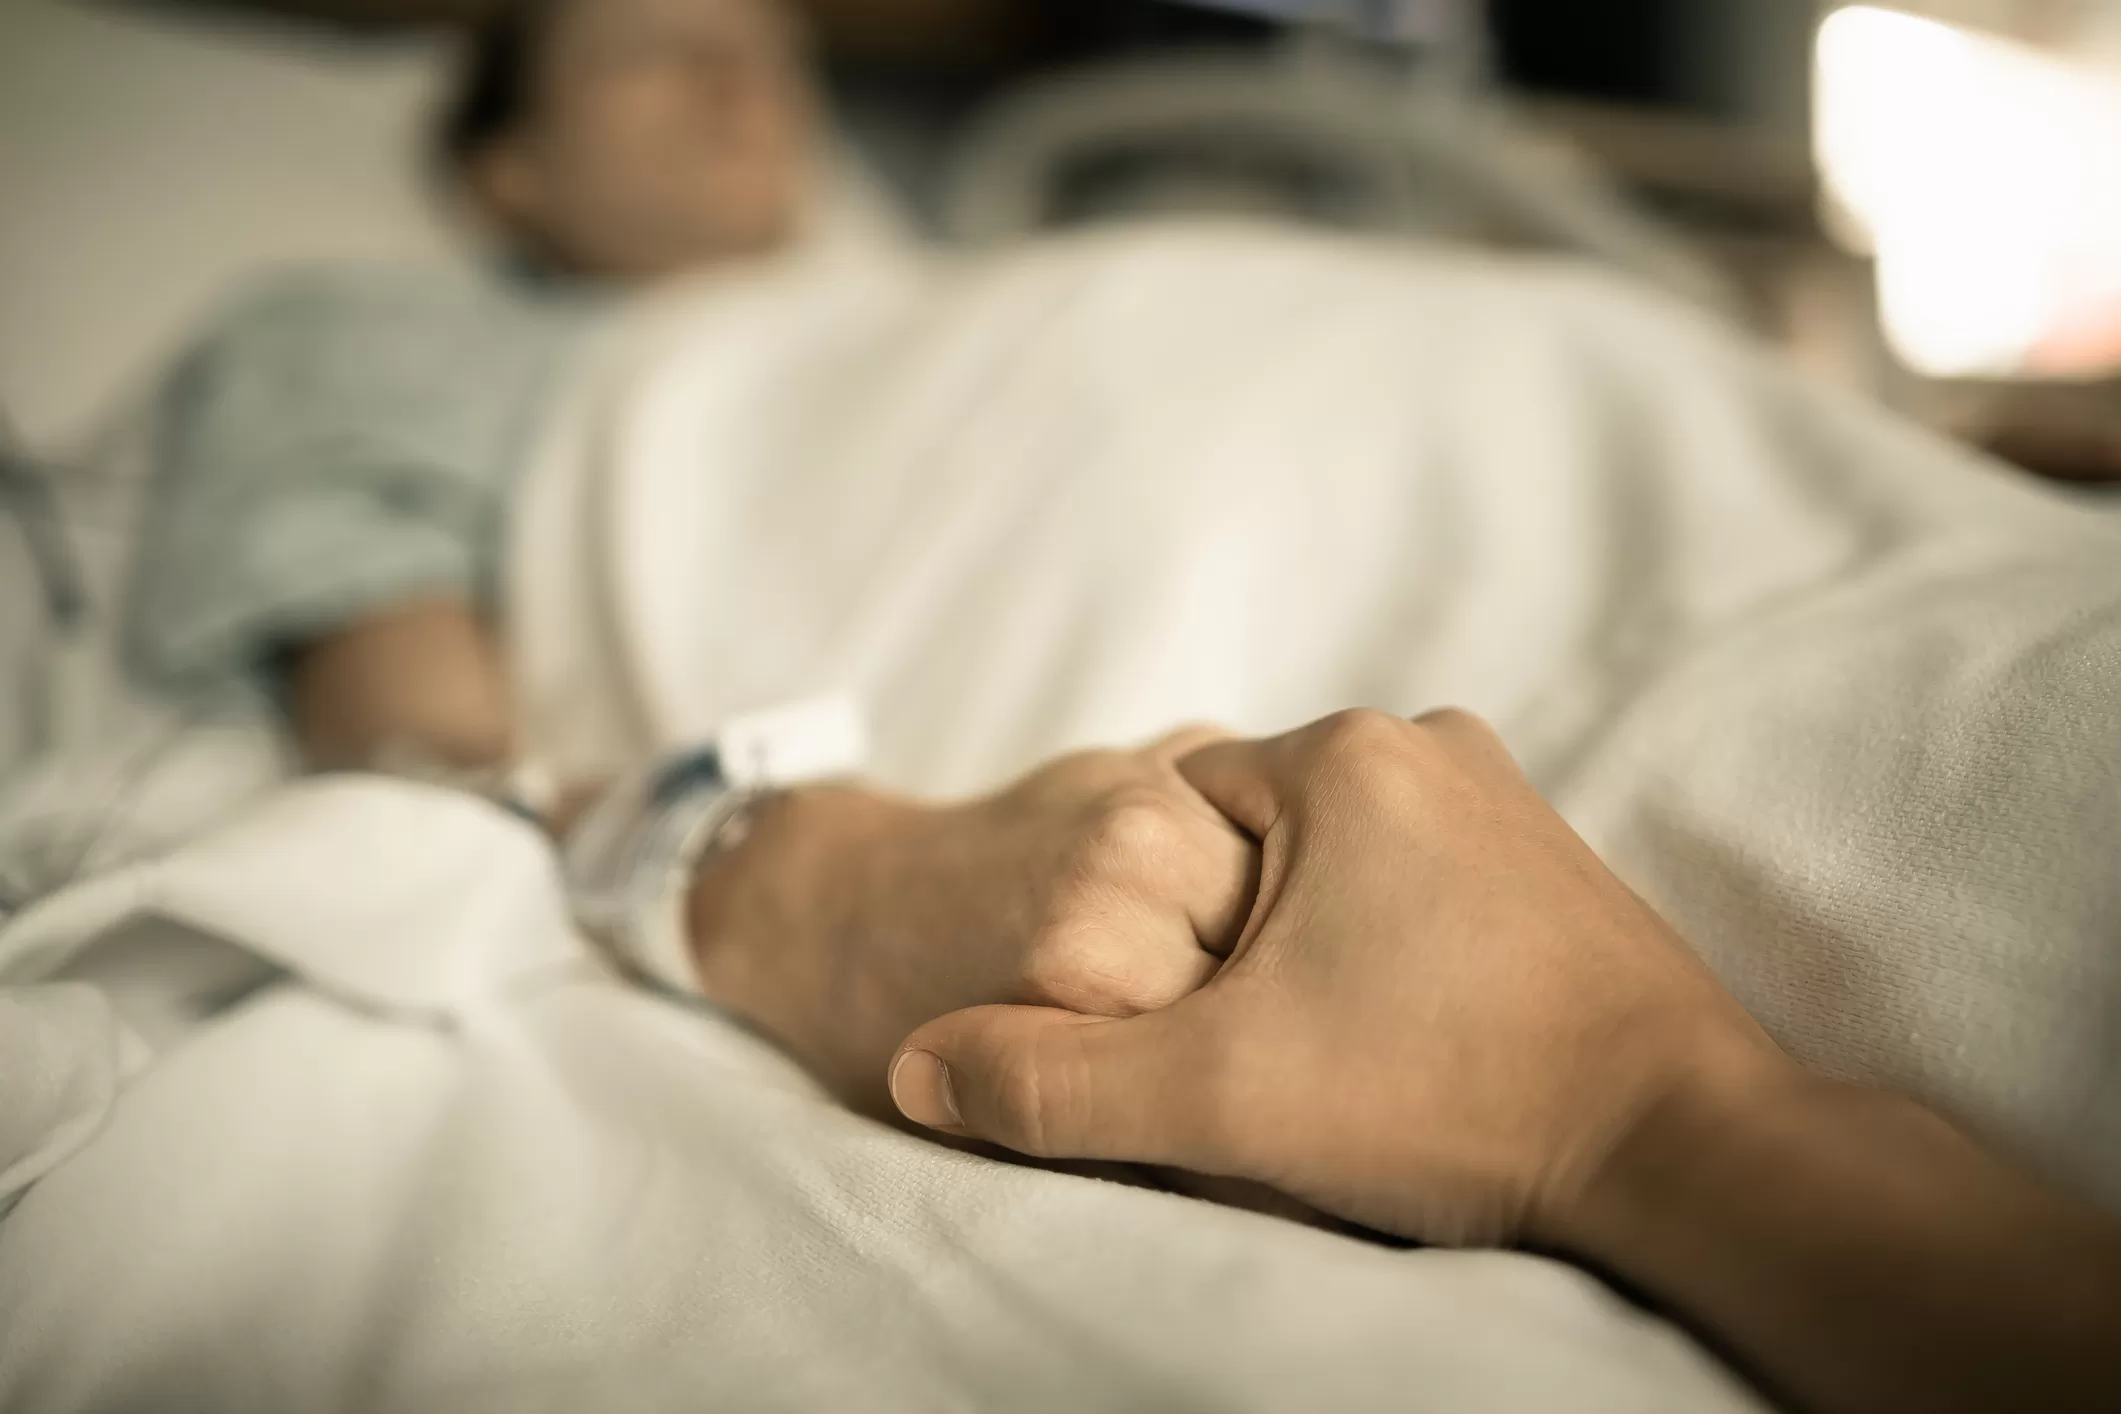 Terminally ill woman asks her husband's last wish: to have sex with her ex
